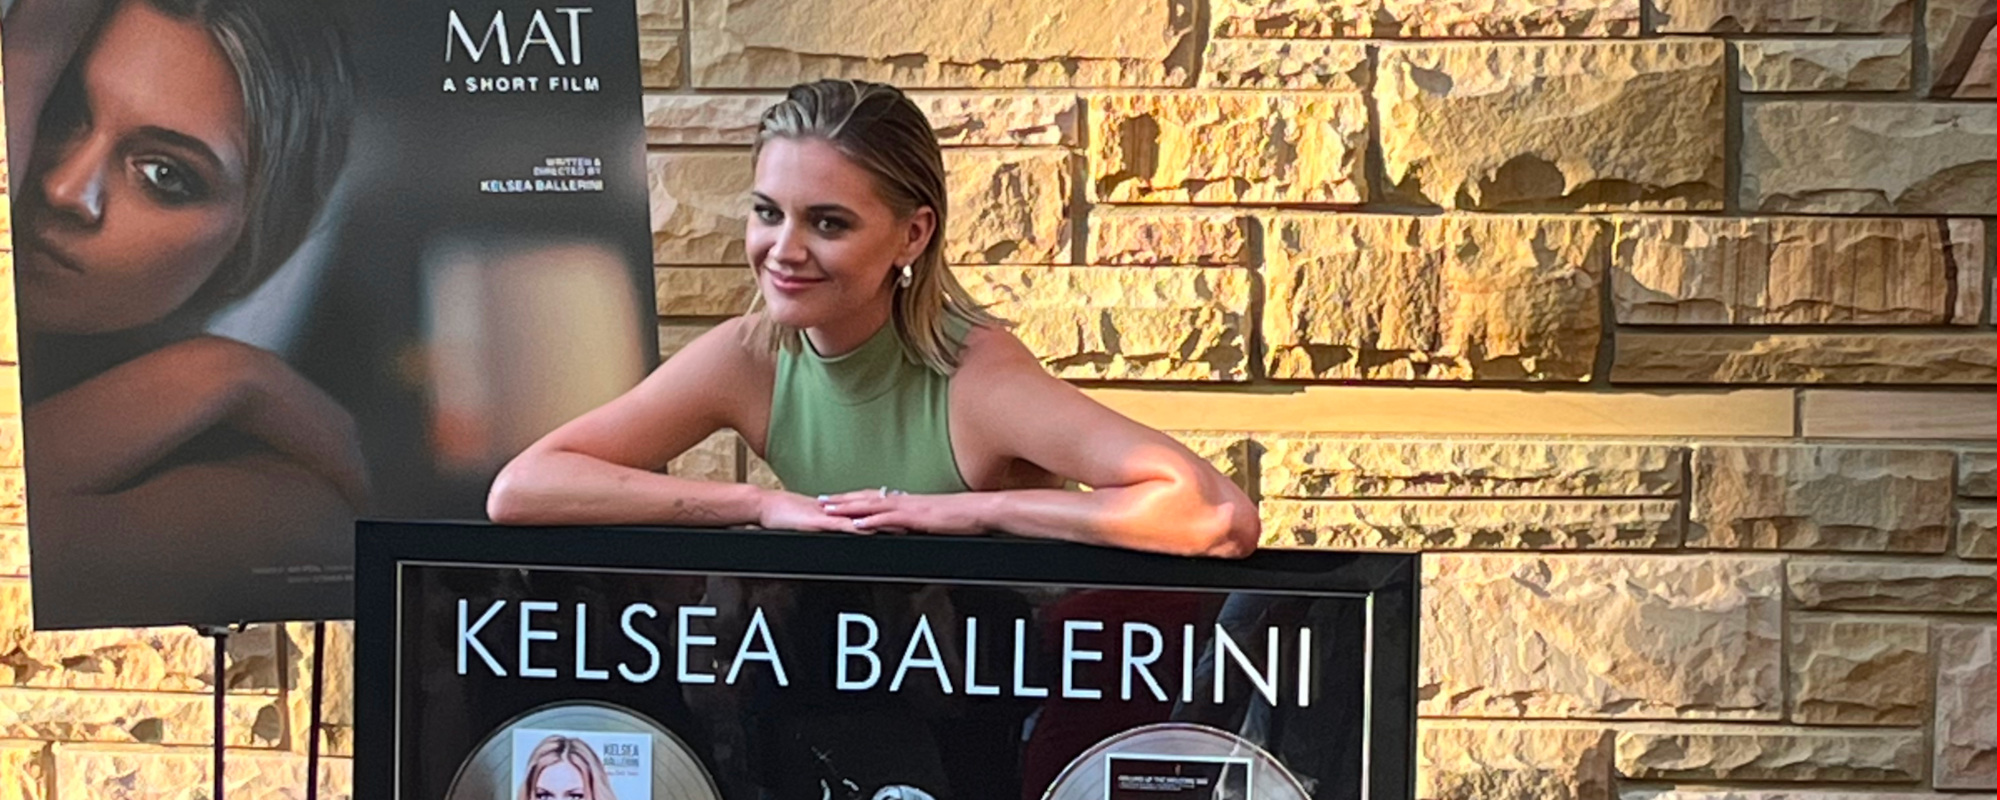 Kelsea Ballerini Shares Intimate Screening of ‘Rolling Up The Welcome Mat’—“This is My Way of Closing the Really Life-Changing Chapter”